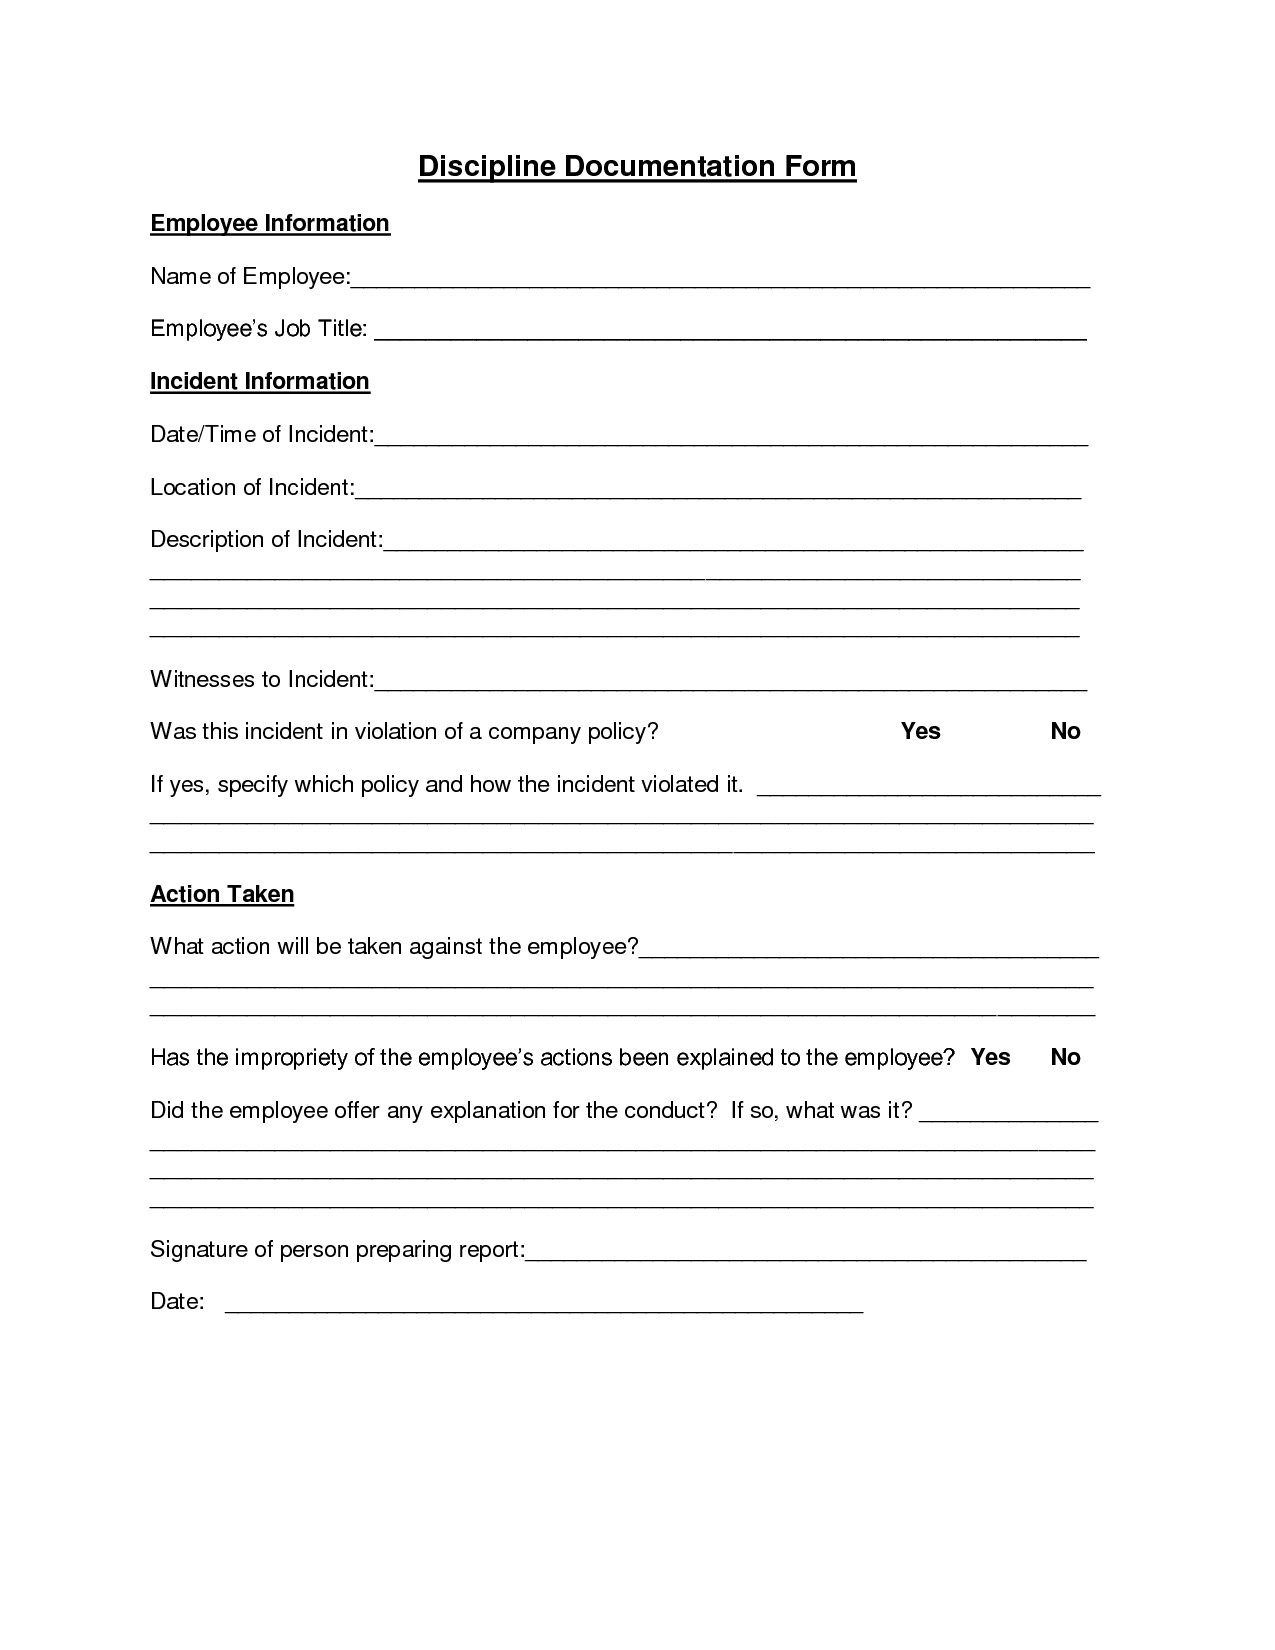 Employee Write Up form Template Employee Discipline form Employee forms